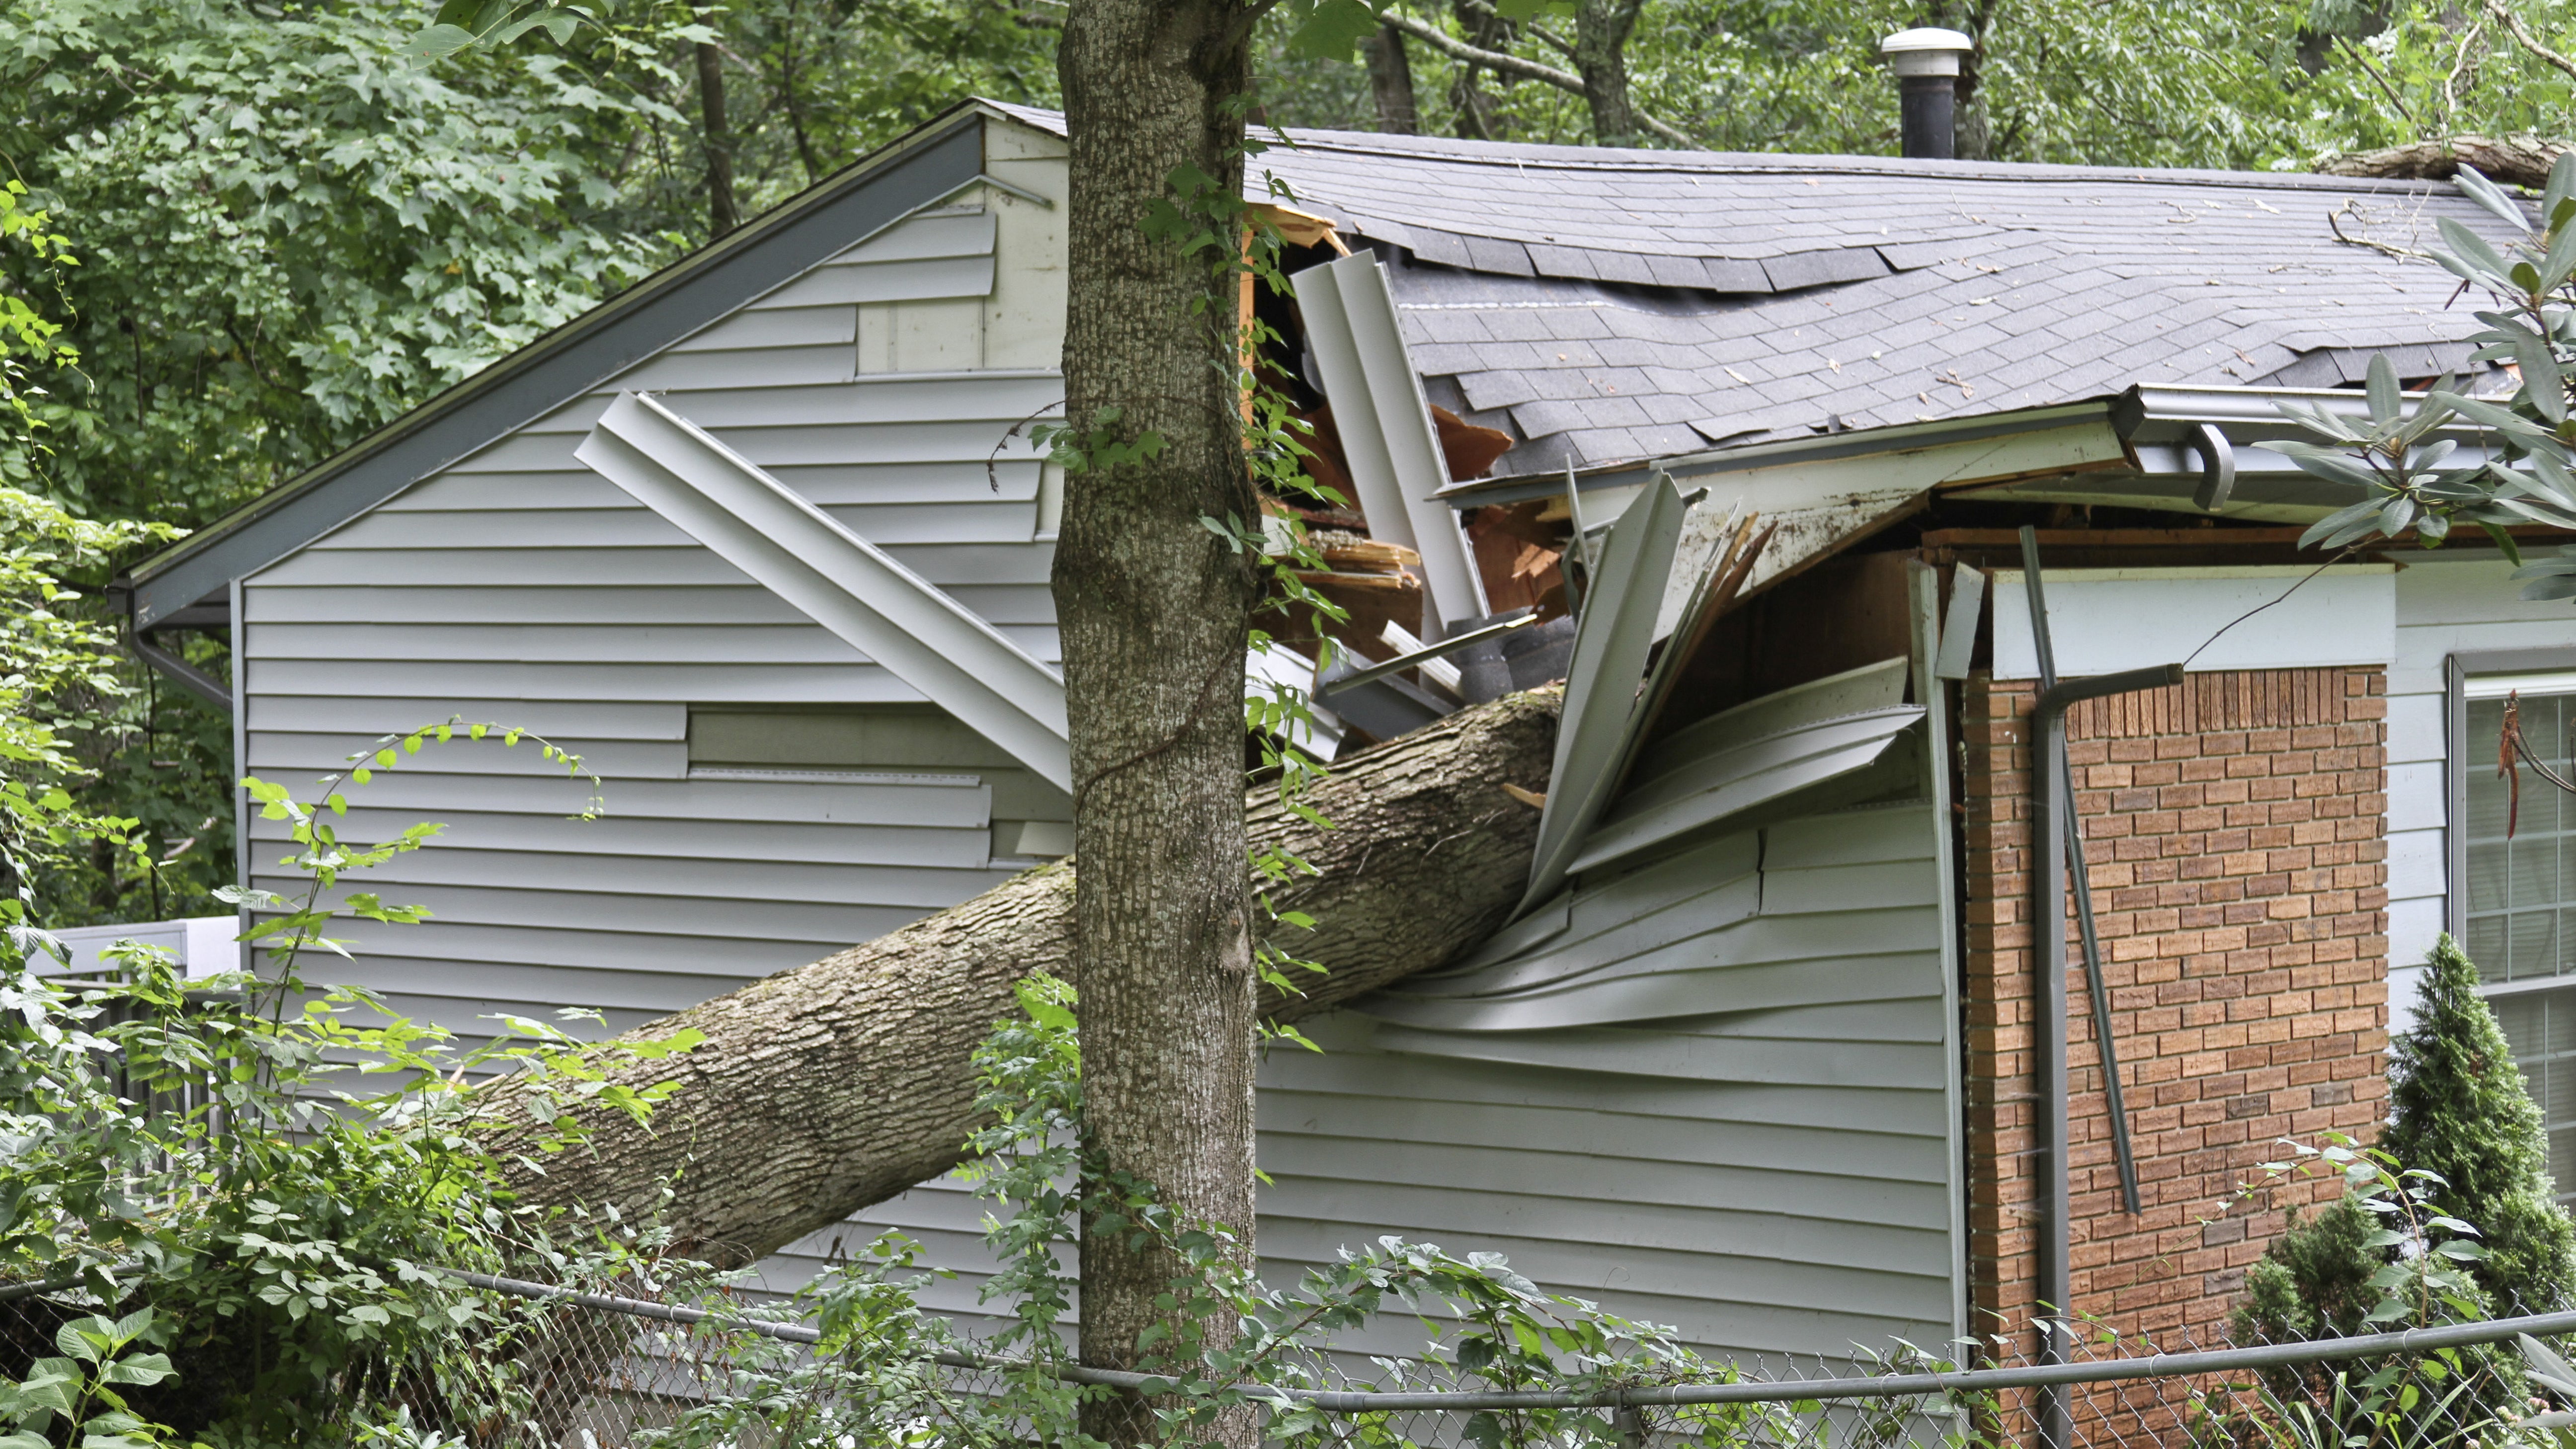 image of a fallen tree on the roof of a house.